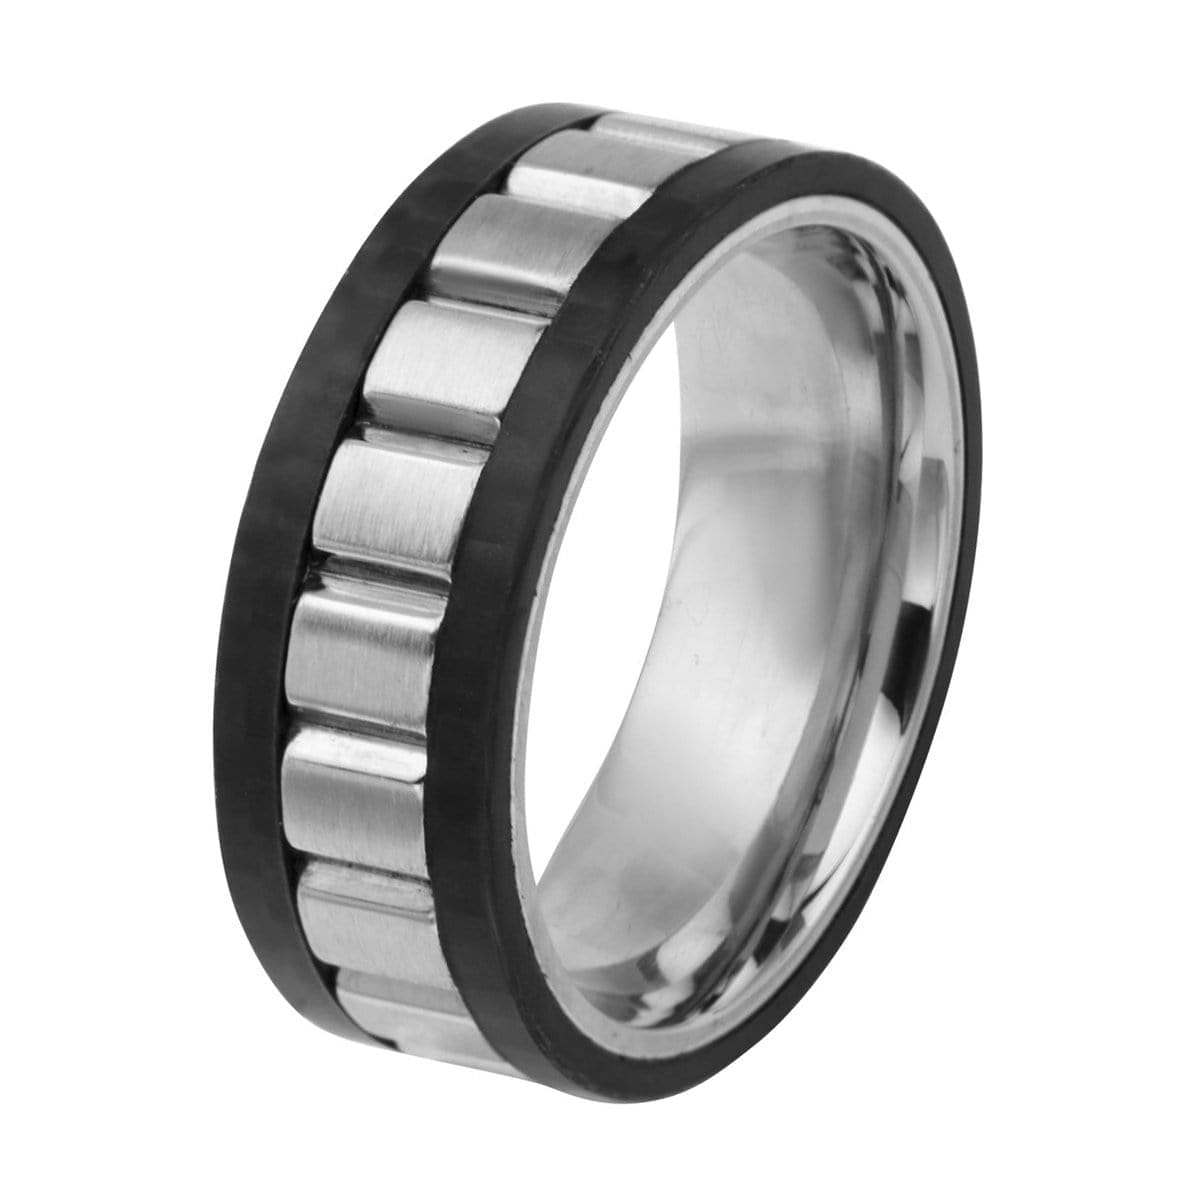 INOX JEWELRY Rings Silver Tone Stainless Steel Large Ridged Center Band with Carbon Fiber Detail